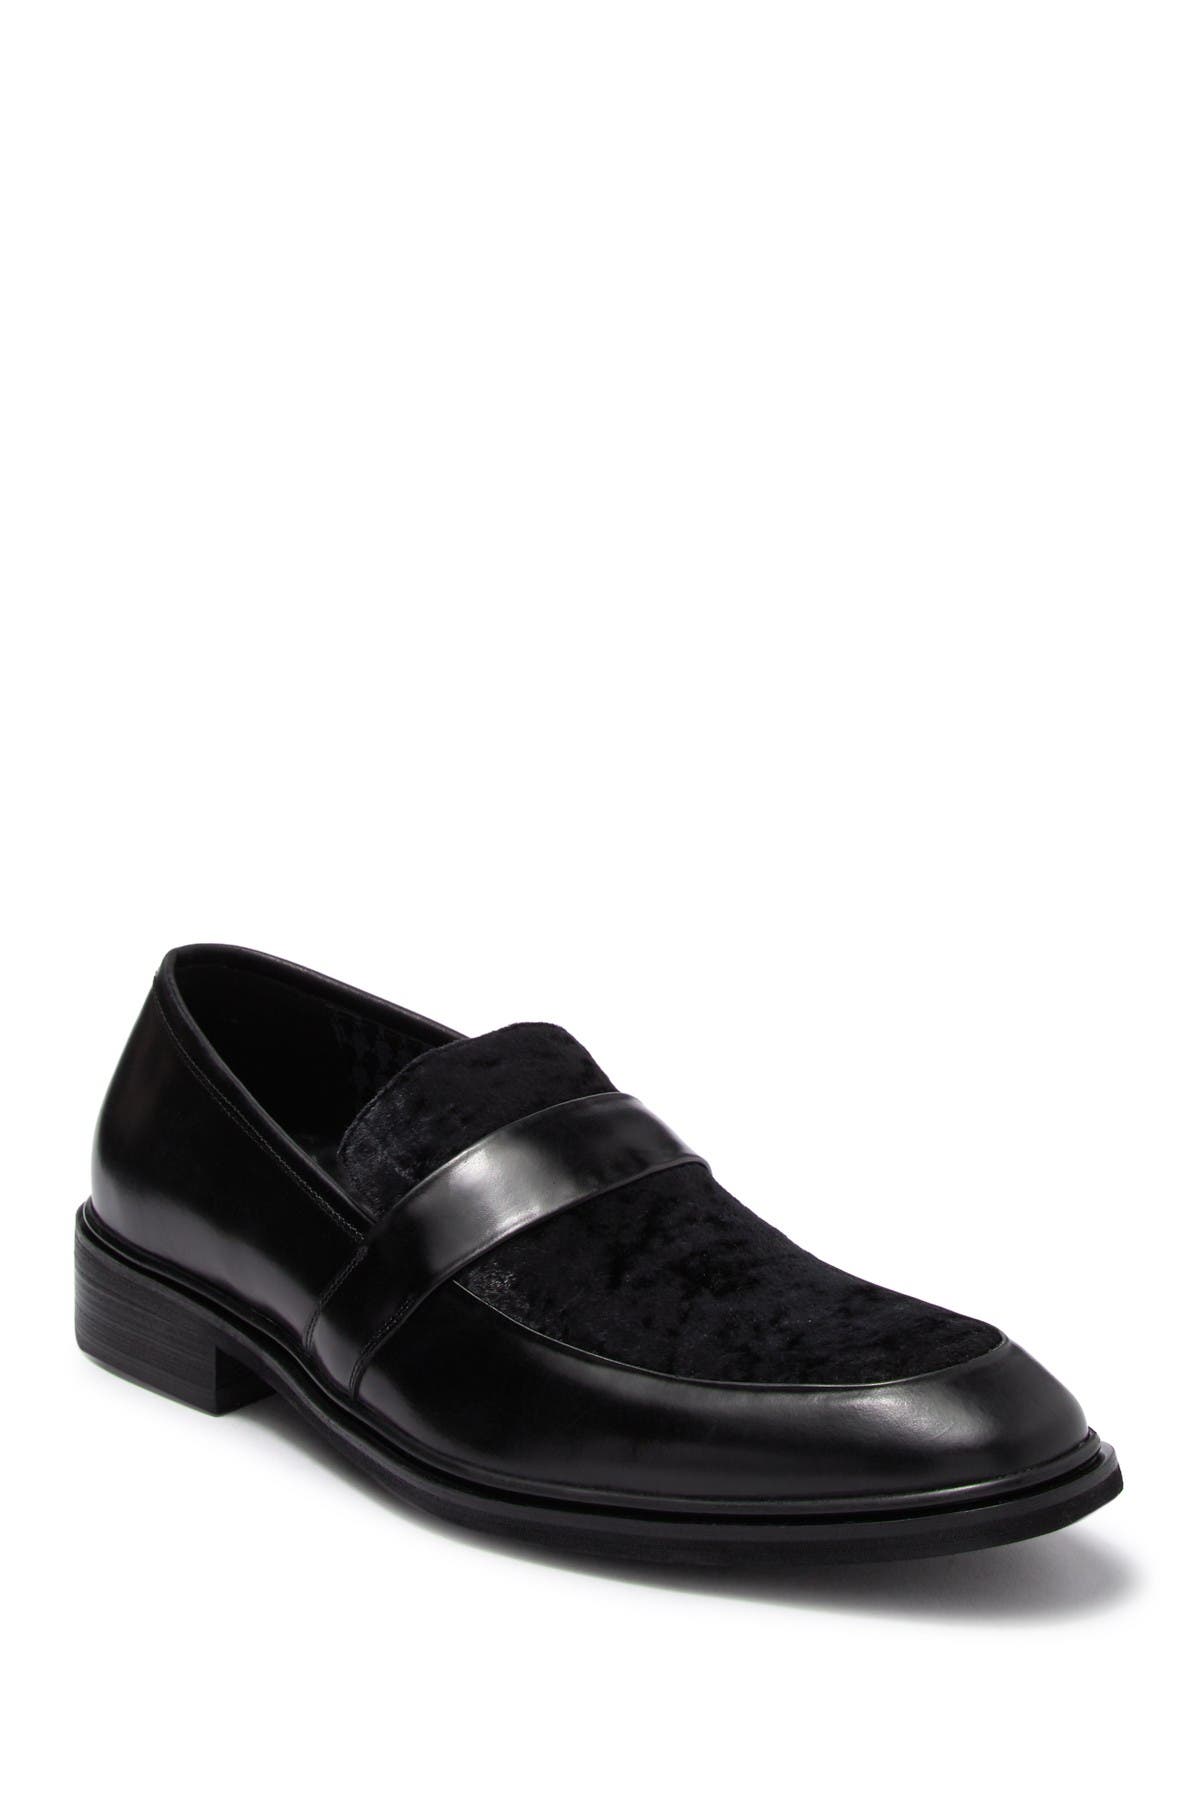 karl lagerfeld loafers